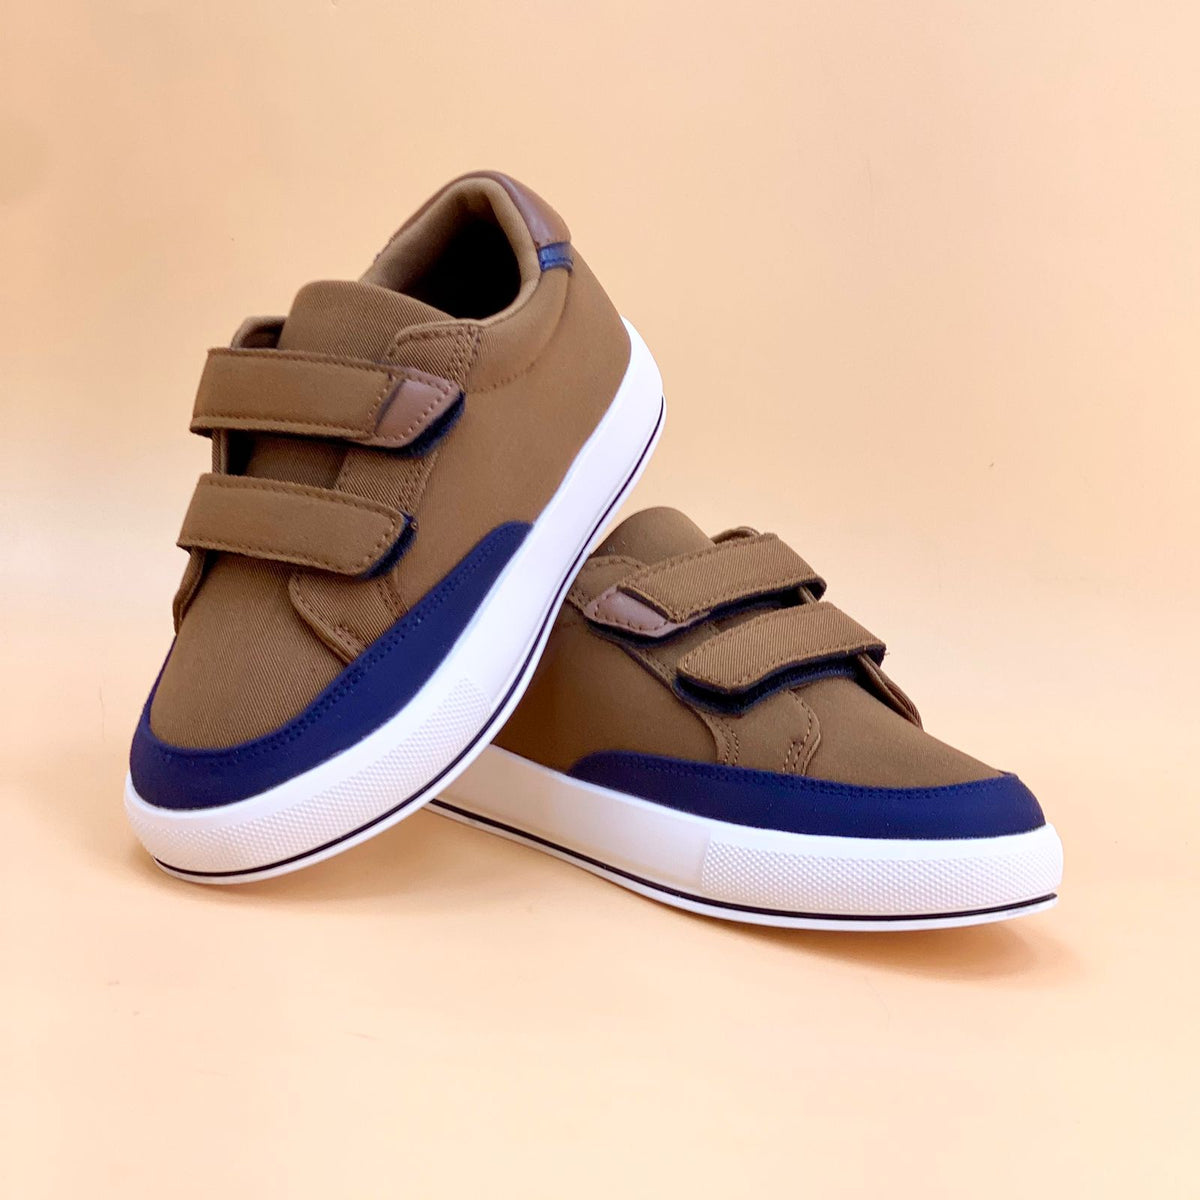 NEW ,  KIDS SHOES SIZE FROM 20 TO 37 K80